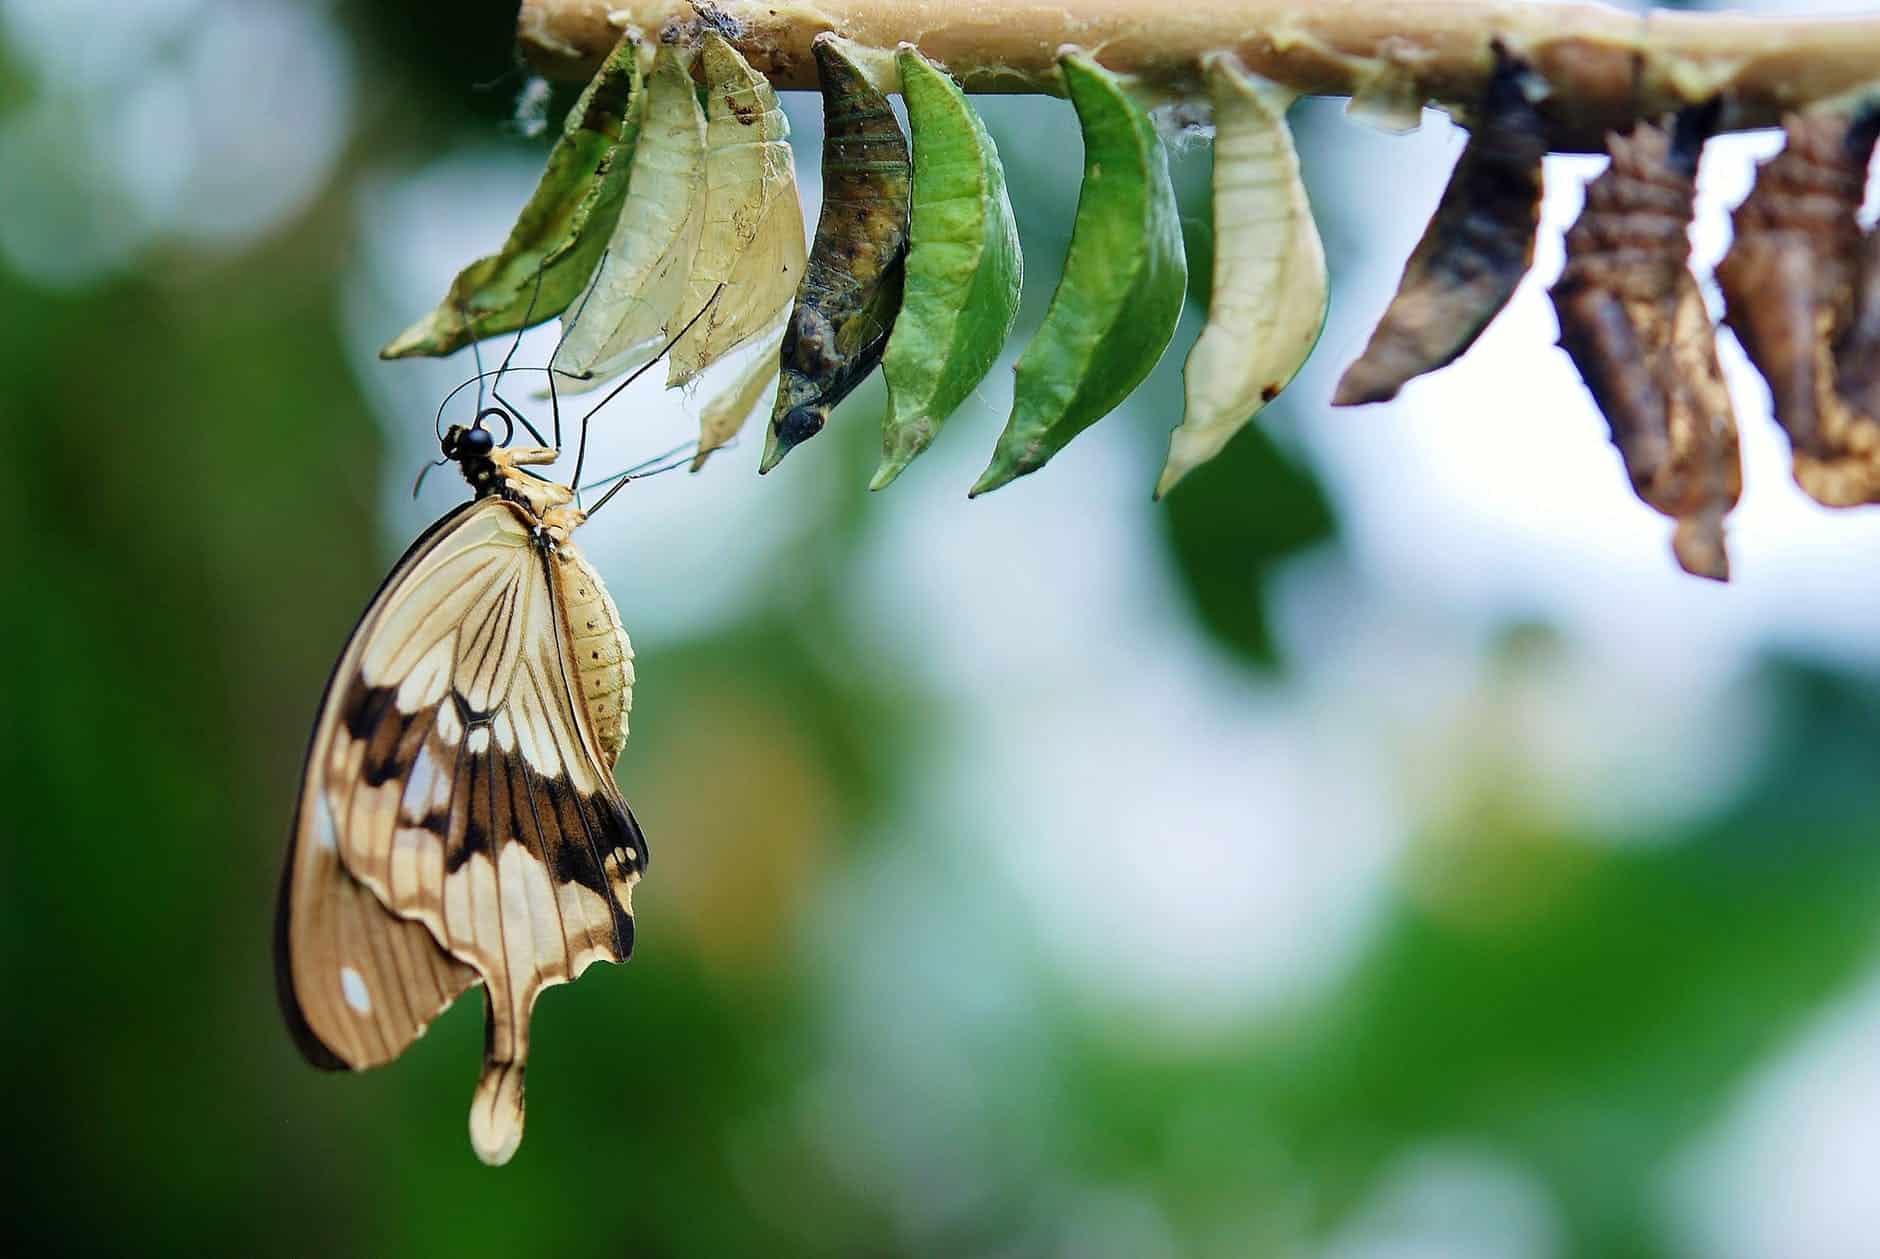 Brown and white swallowtail butterfly - caterpillar twists to embed its cremaster in a silk pad. Then sheds its skin one final time, revealing its chrysalis